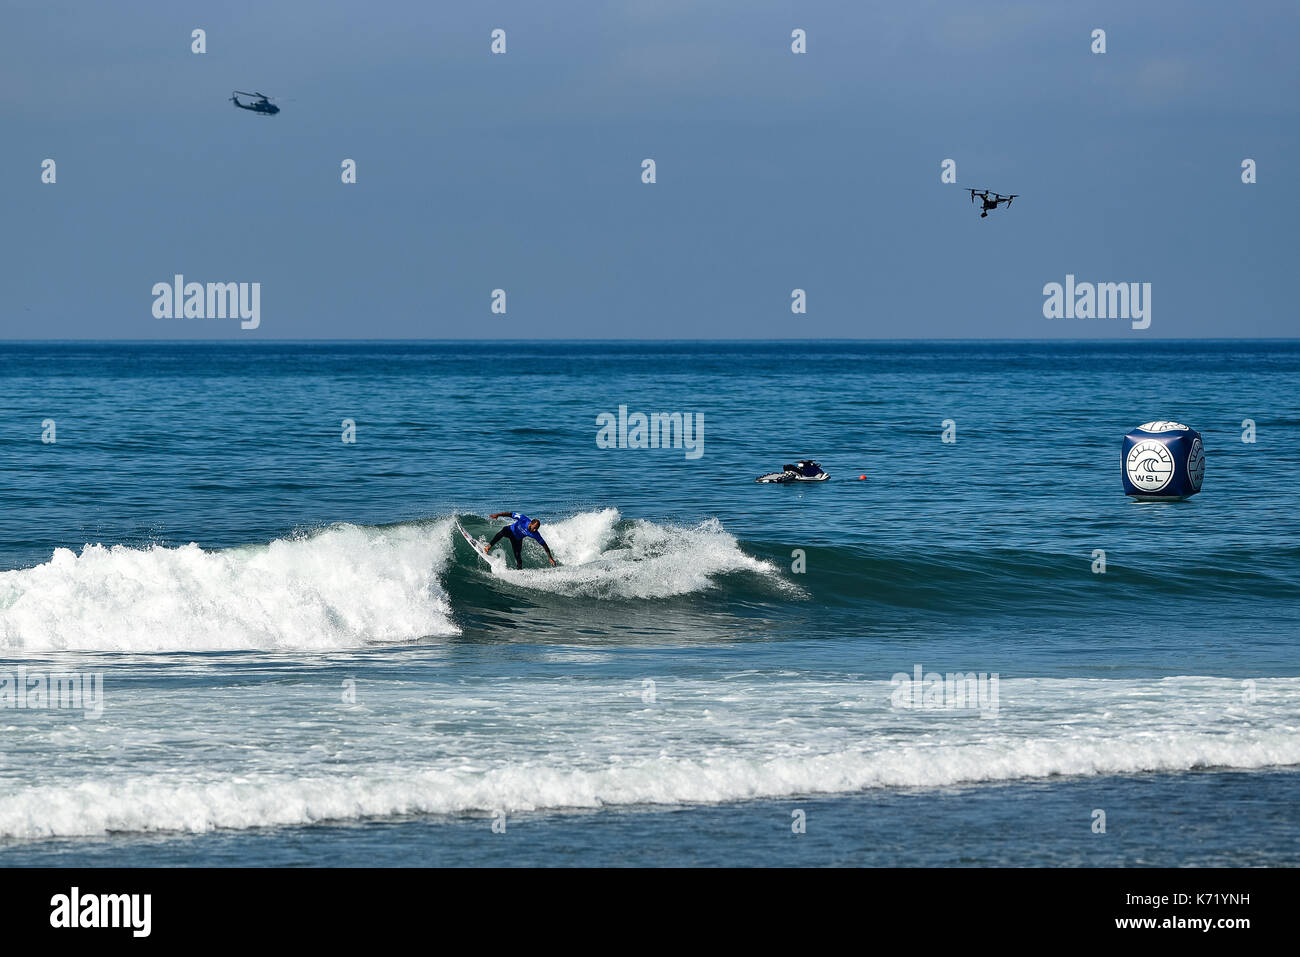 San Clemente, USA. 13 September, 2017.  Surfers compete head to head during the 2017 Hurley Pro surf contest at Lower Trestles, San Onofre State Park, CA. Surfer: Jadson Andre (BRA). Credit: Benjamin Ginsberg/Alamy Live News. Stock Photo